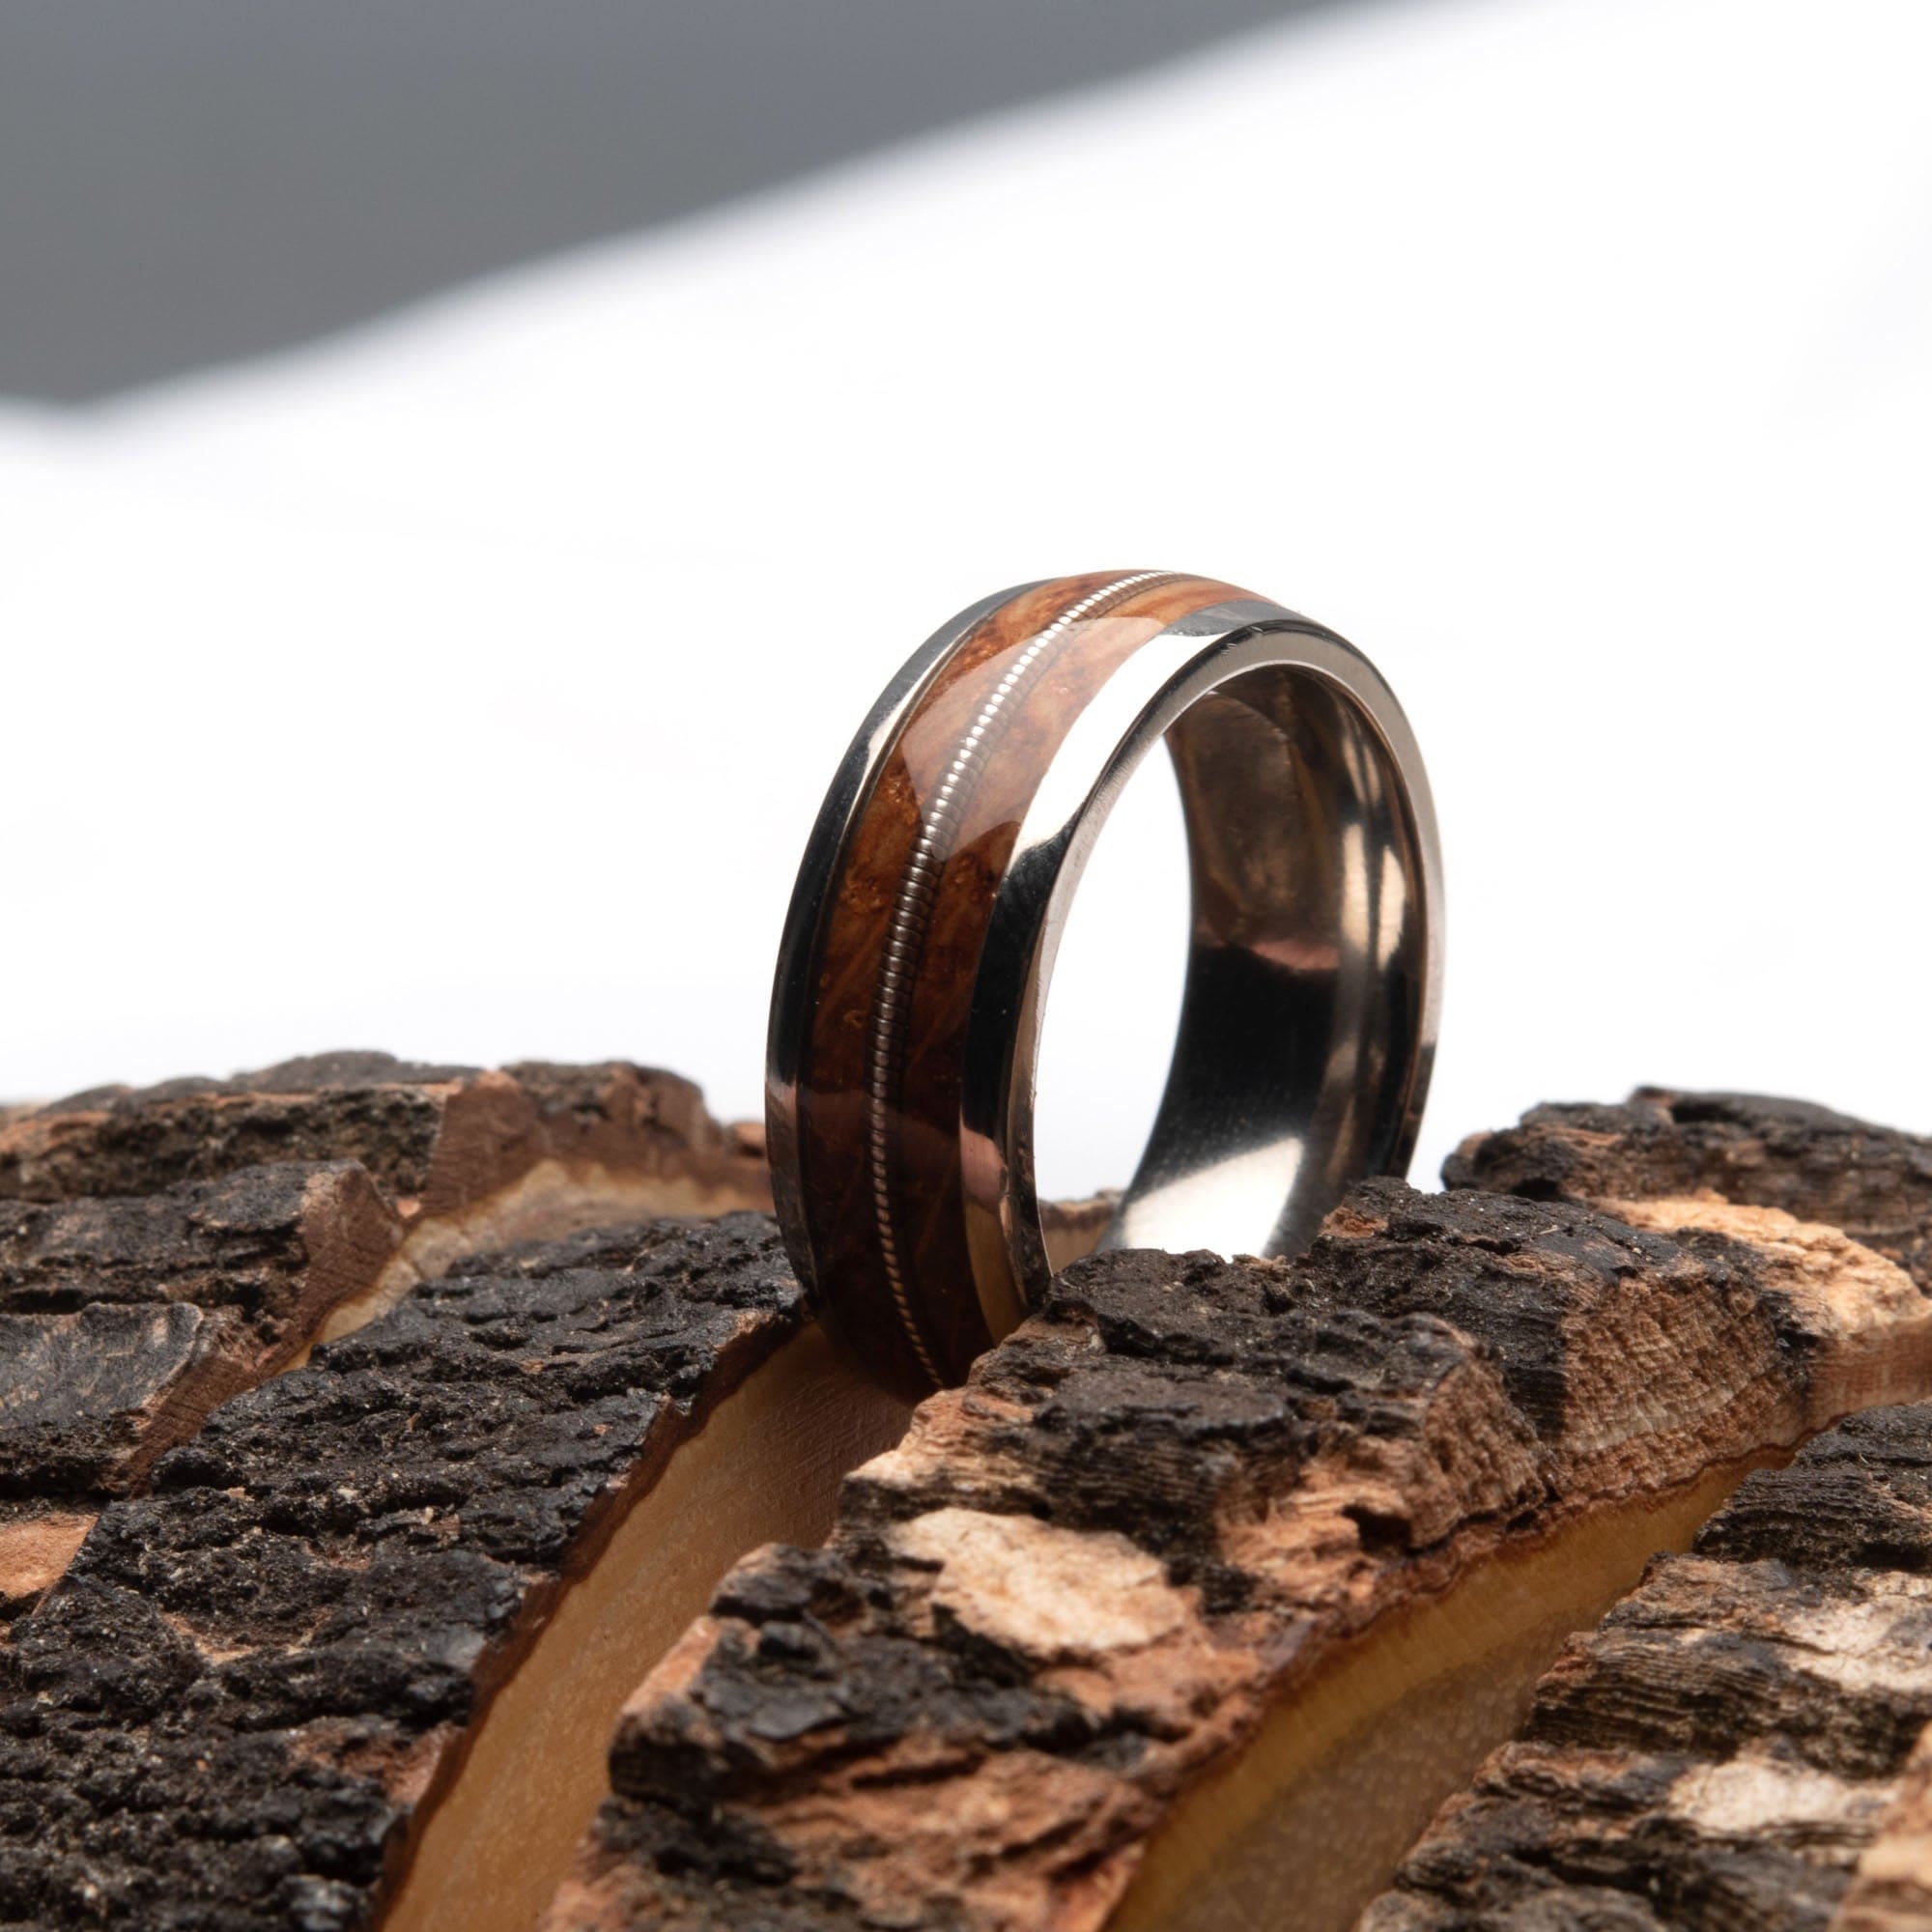 INOX JEWELRY Rings Silver Tone Titanium with Whiskey Barrel Wood Inlay Band Ring